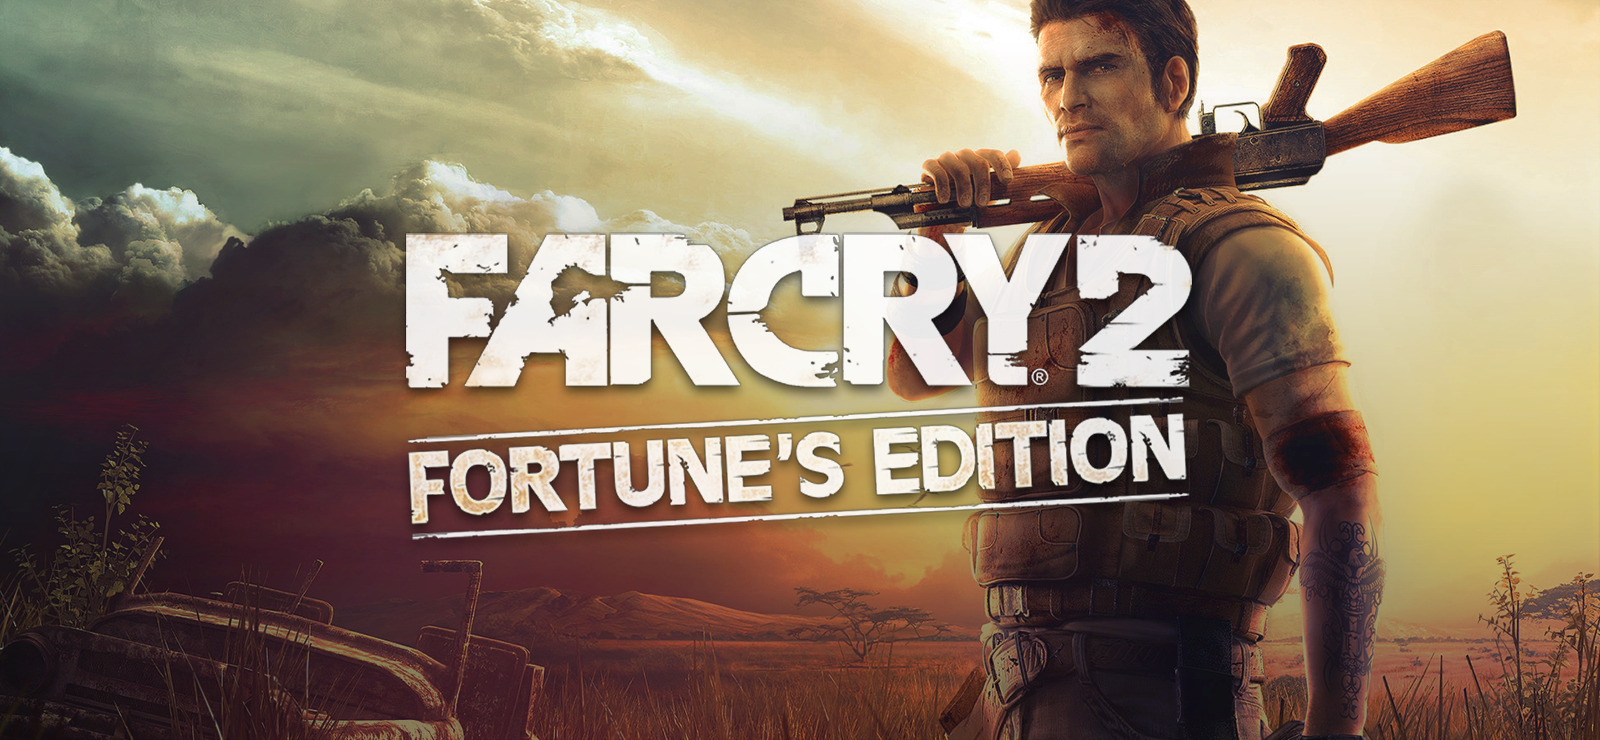 download far cry 3 pc fast download speed